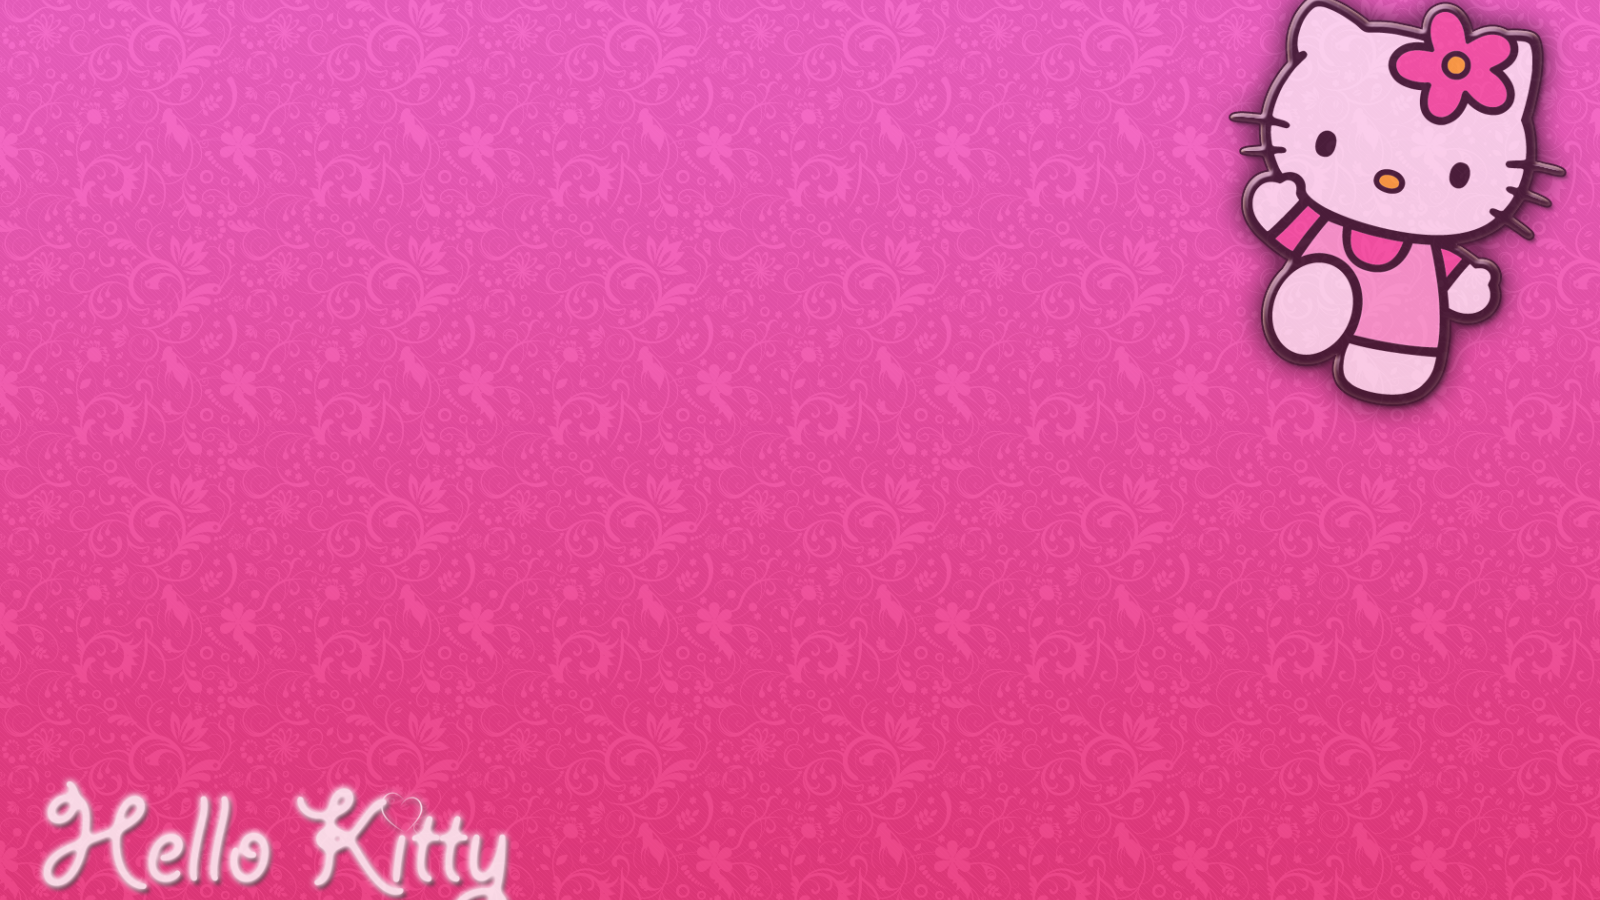 Free download File Name Hello Kitty Cute Background Wallpaper